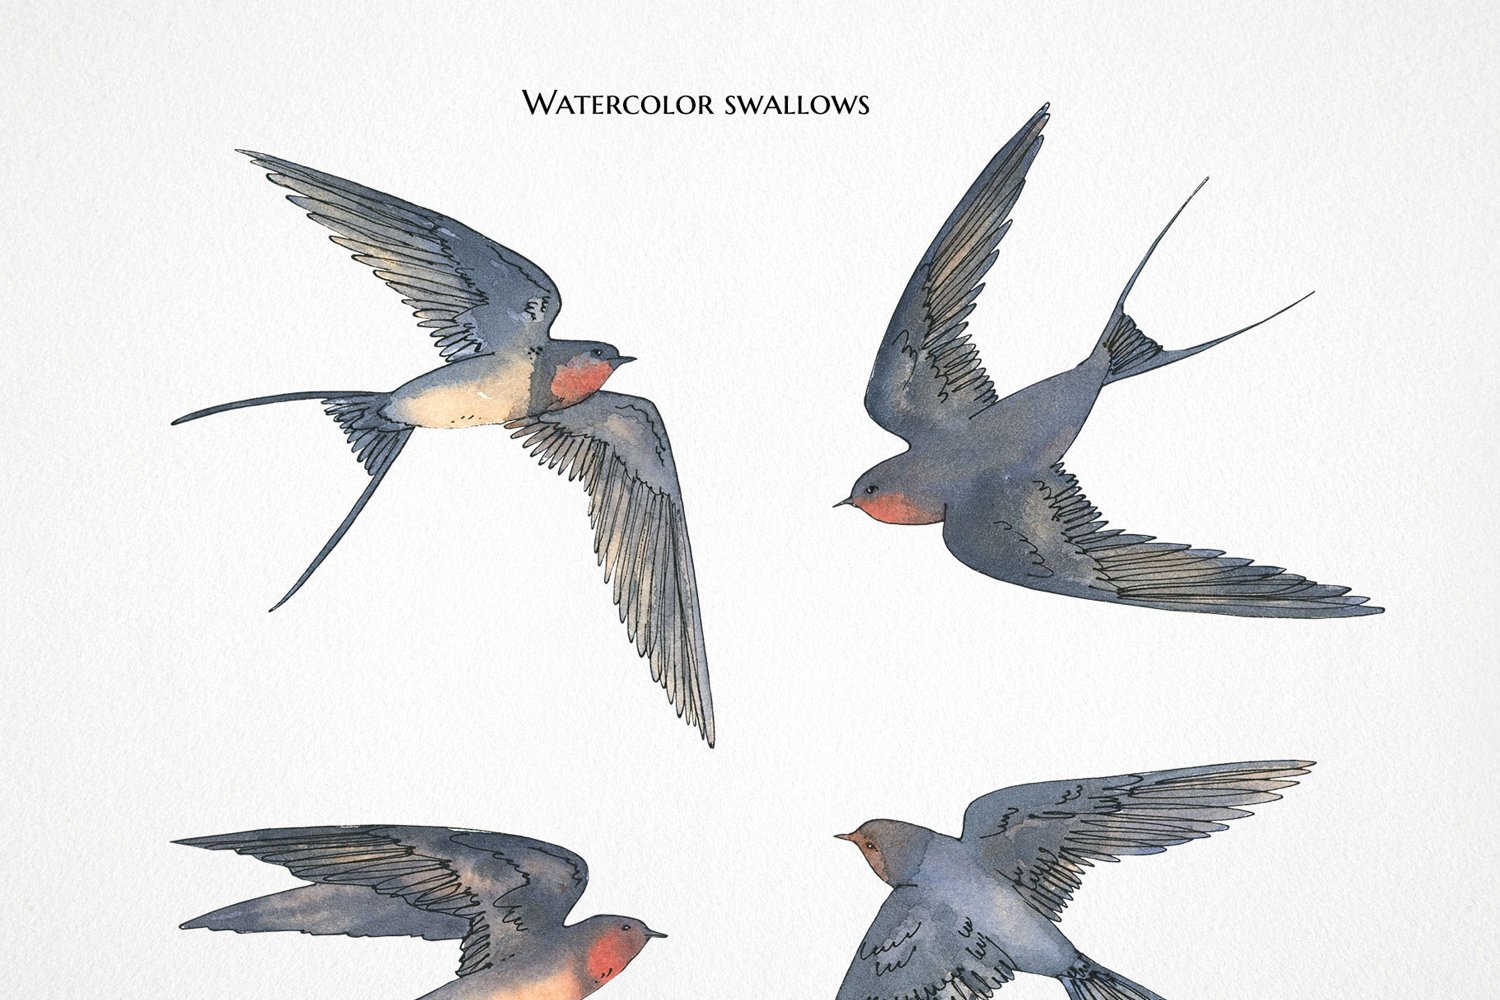 Professionally designed watercolor swallows.